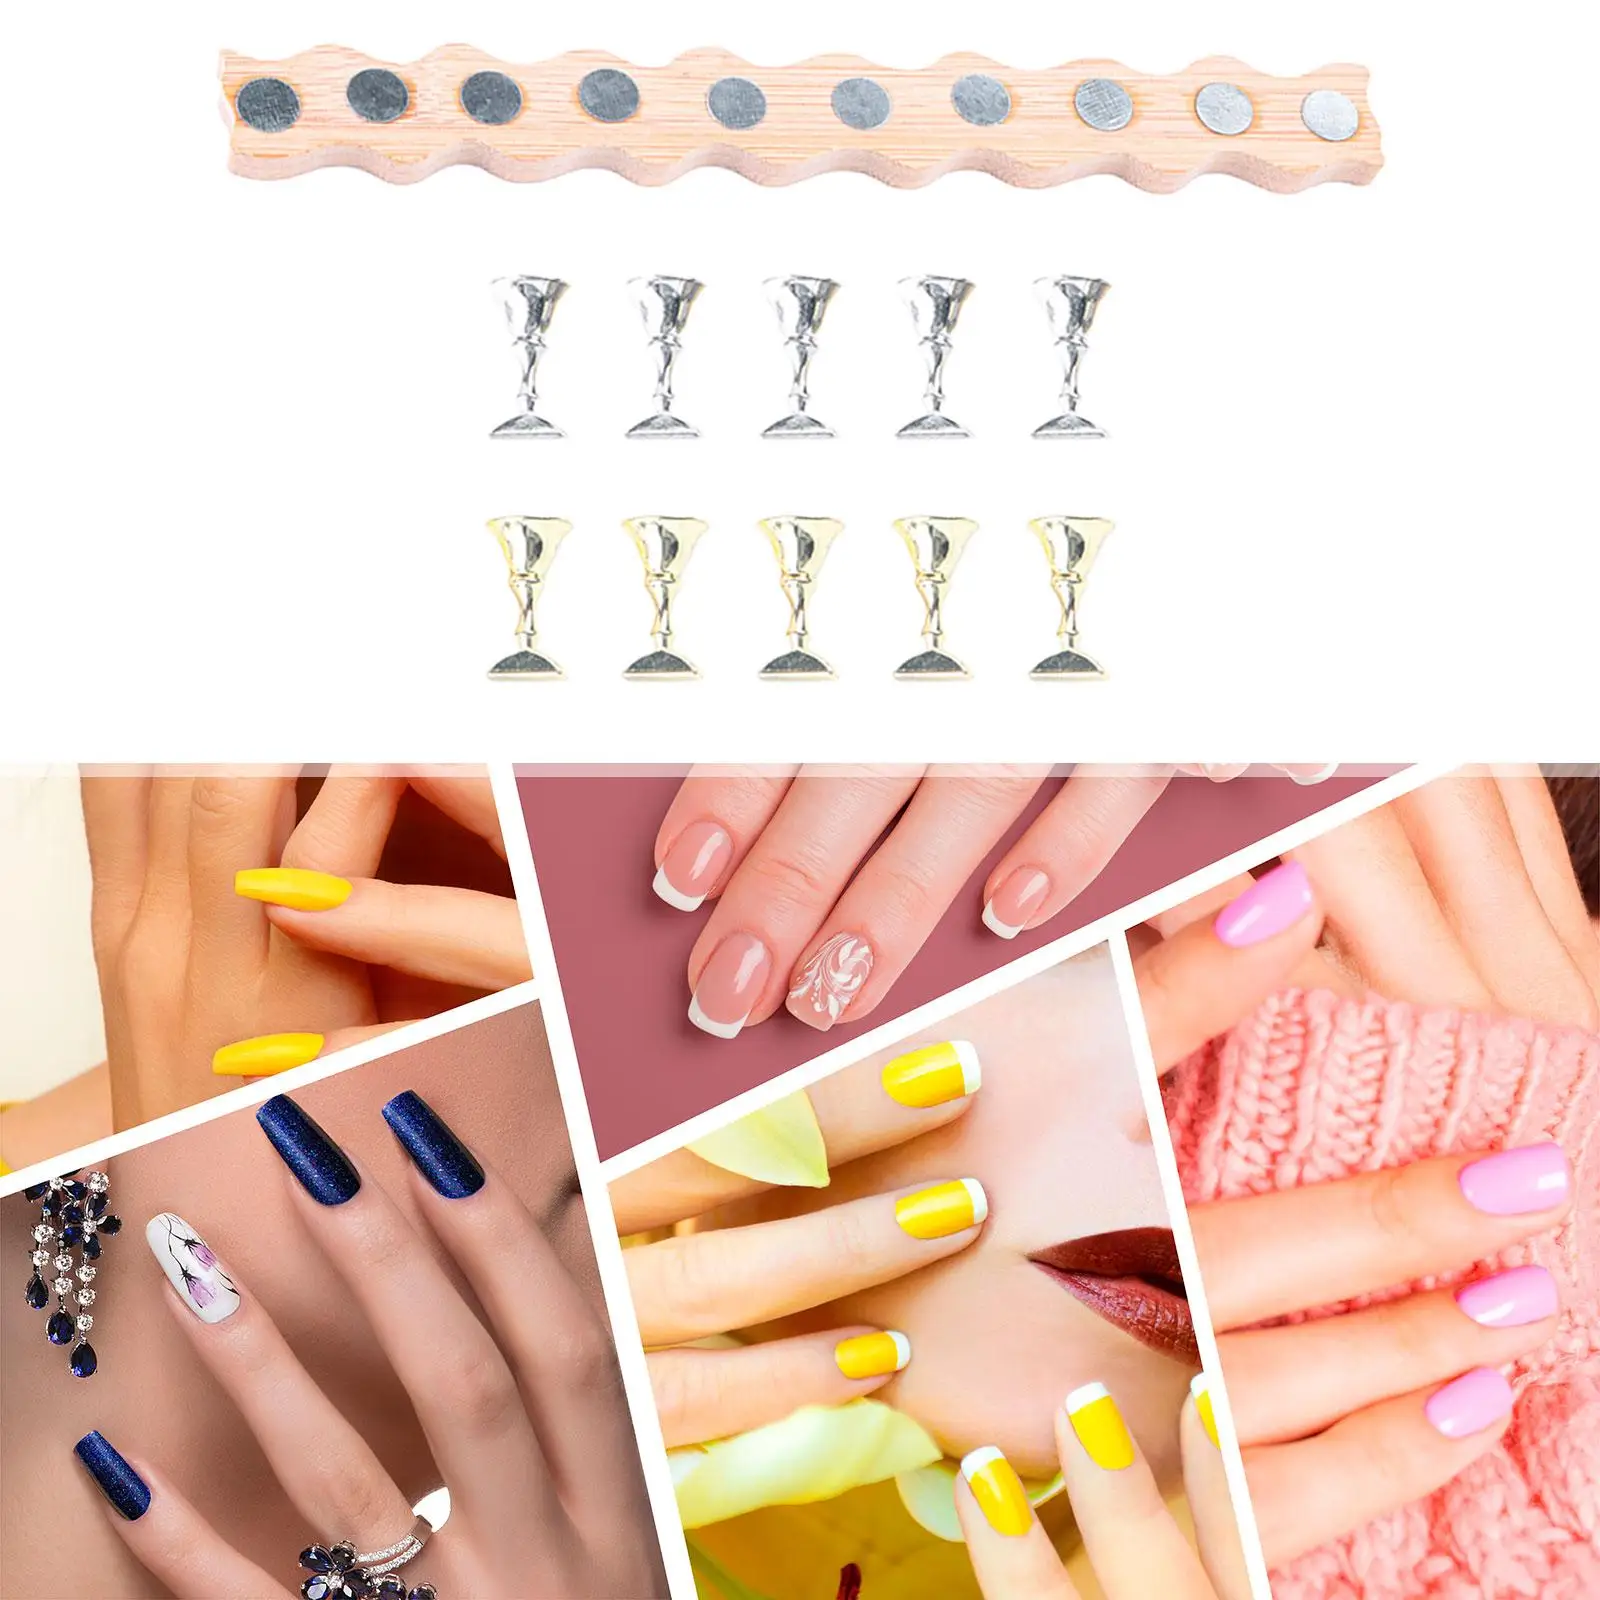 Nail Stand Accessories Reusable Nail Art Supplies Nail Showing Shelf for Beginner Home Salon DIY Manicurists Training Practice